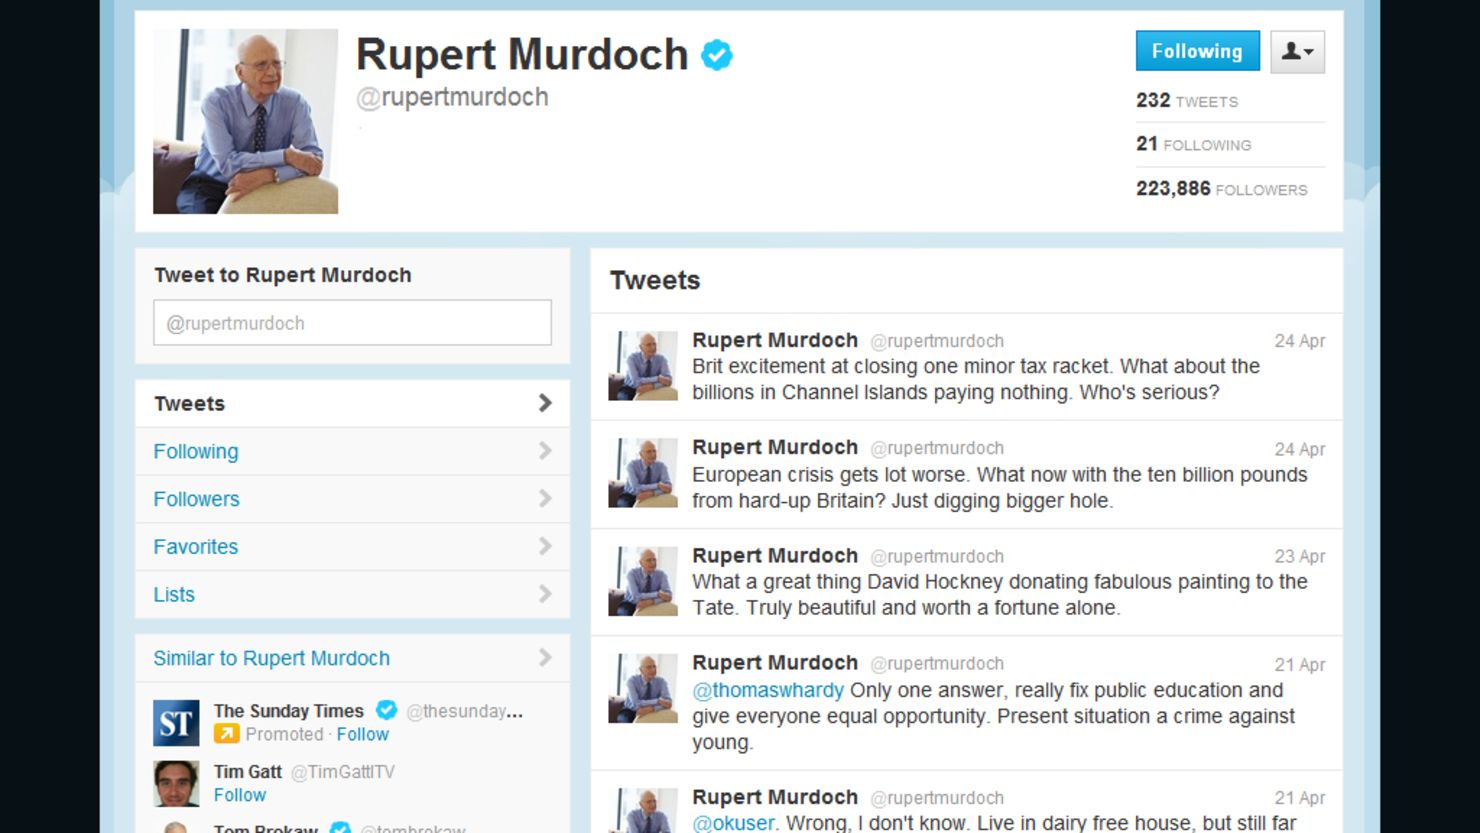 Rupert Murdoch says his tweets mustn't be taken "too seriously." Earlier he wrote: "Sorry, if anyone really cares."